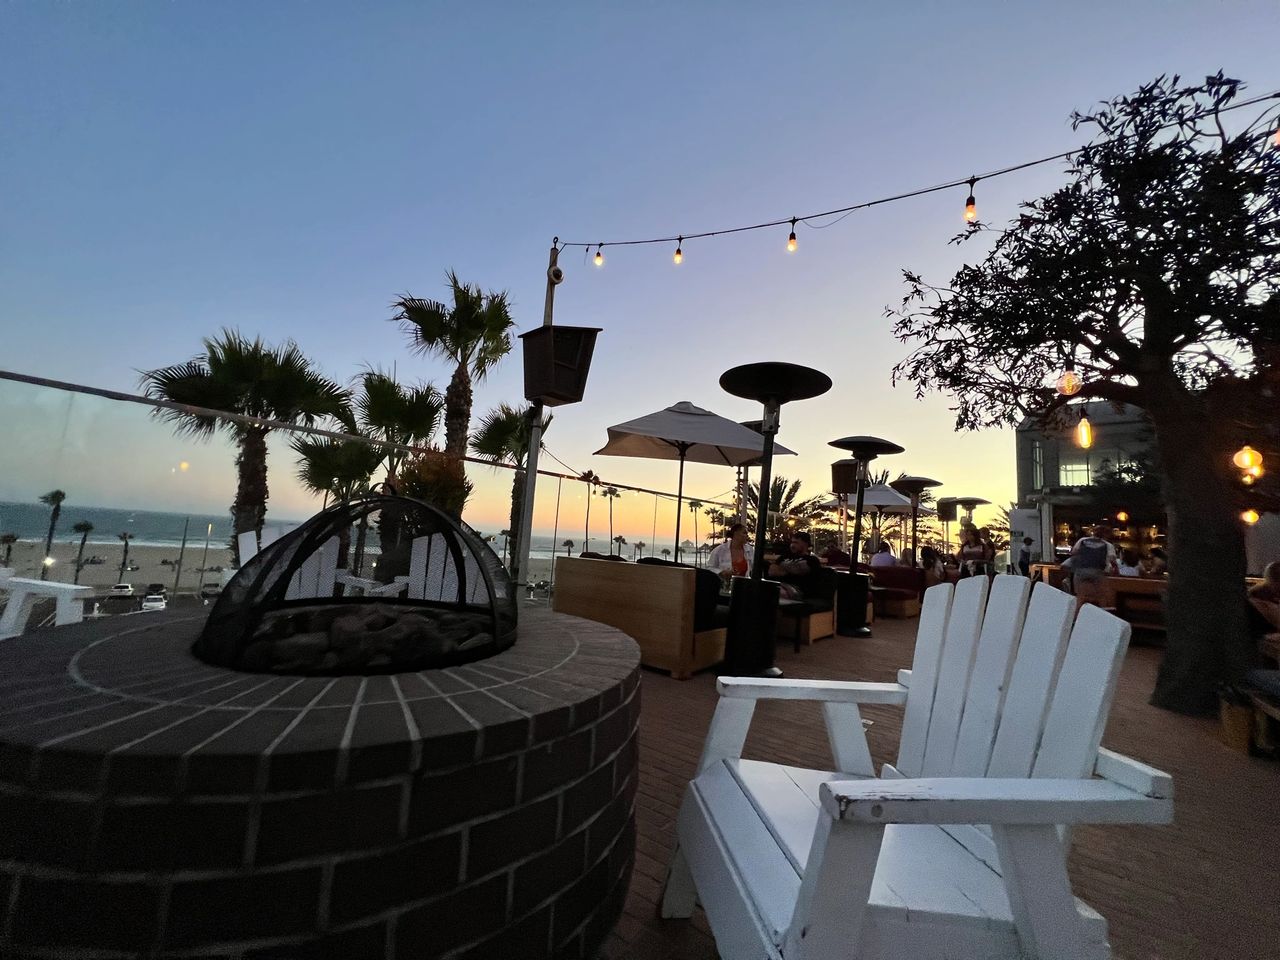 The view of Huntington Beach from the patio